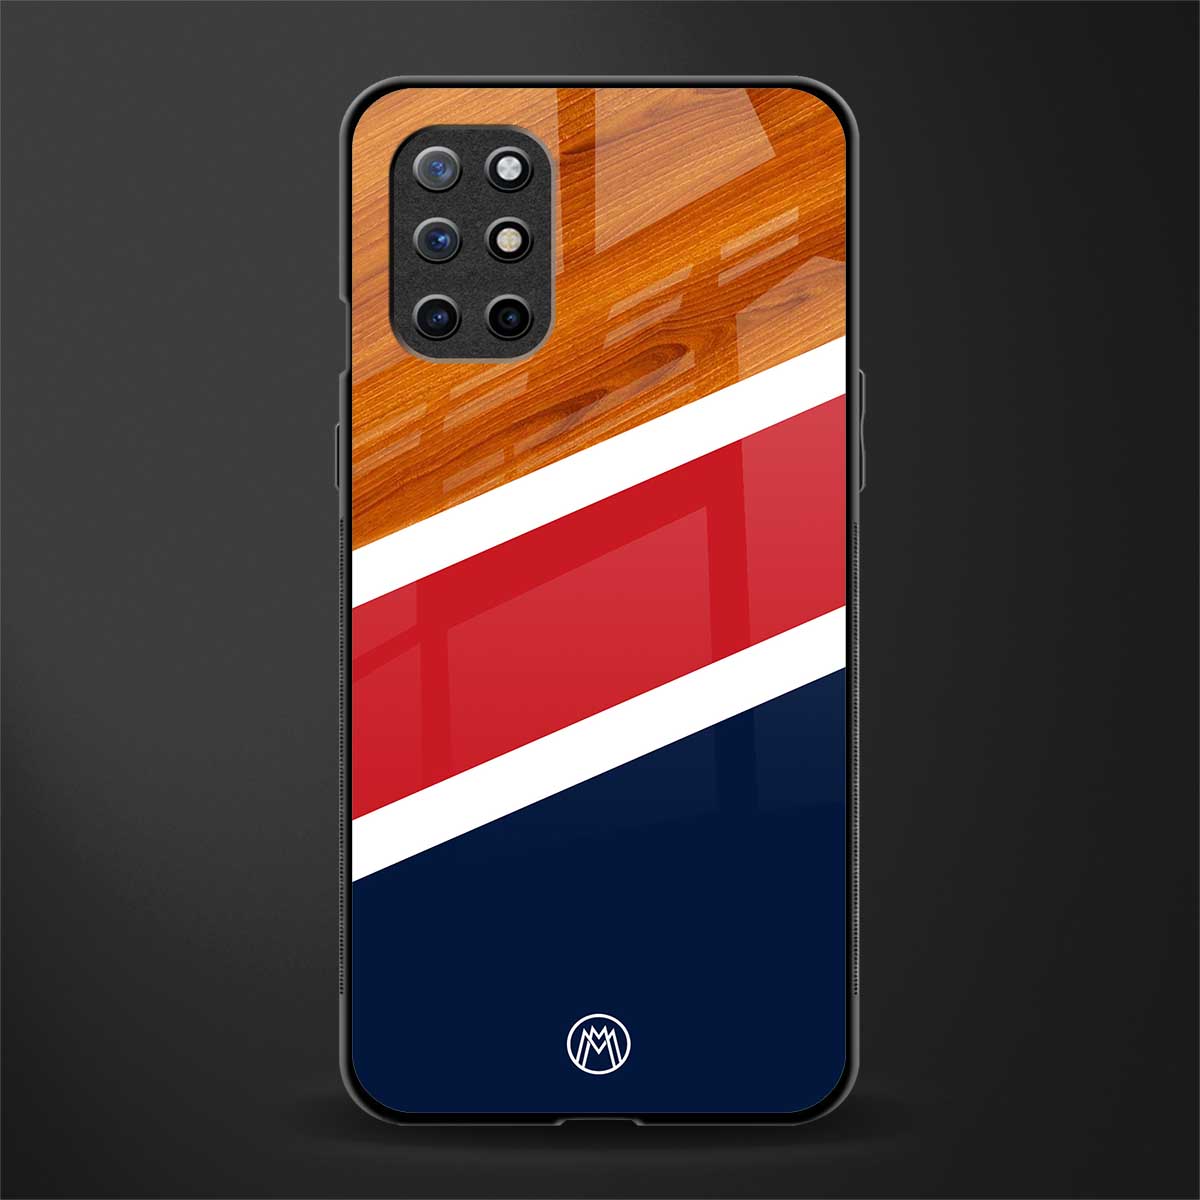 minimalistic wooden pattern glass case for oneplus 8t image